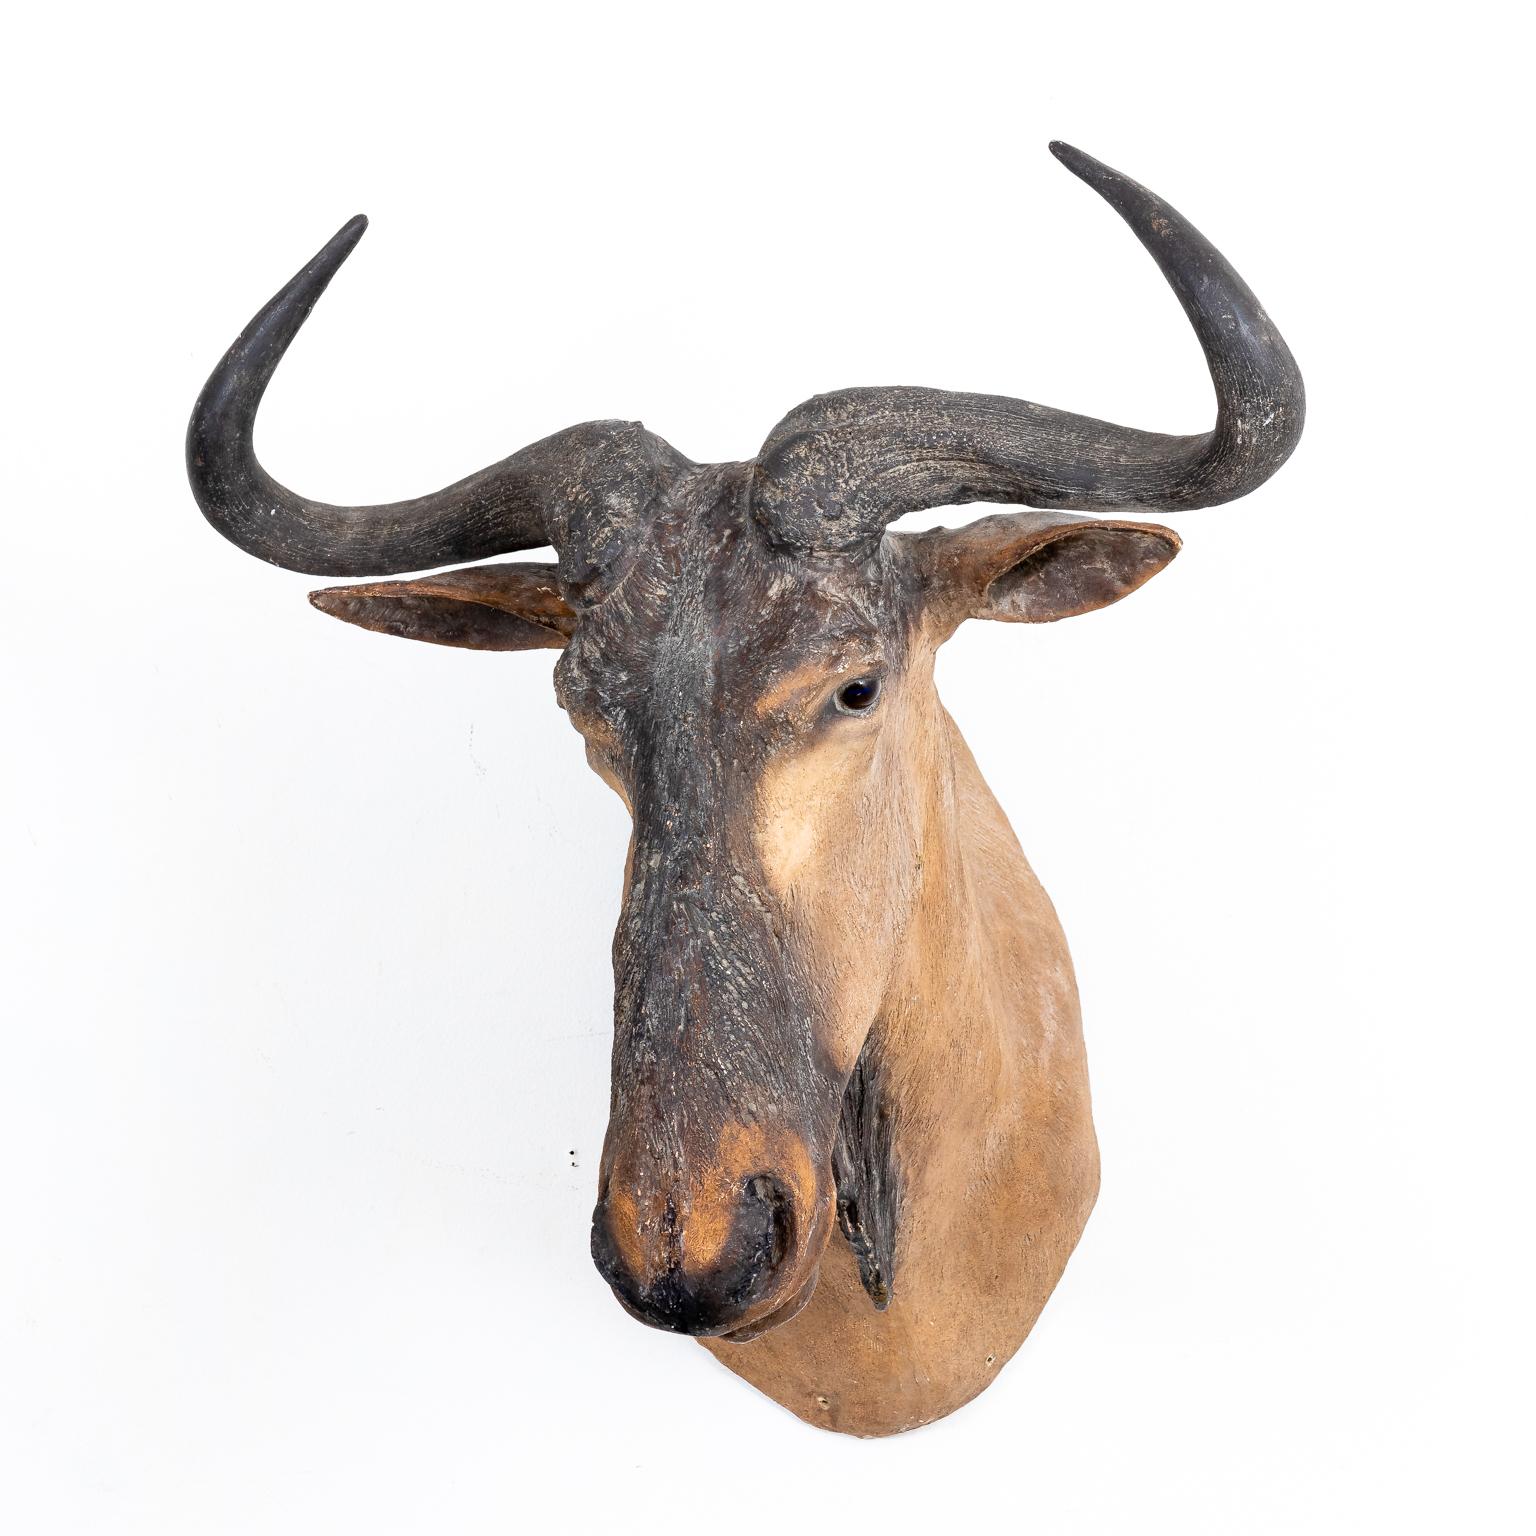 Circa 1980s wildebeest head composed of cast resin with glass eyes. Please note of wear consistent with age. Made in the United States.